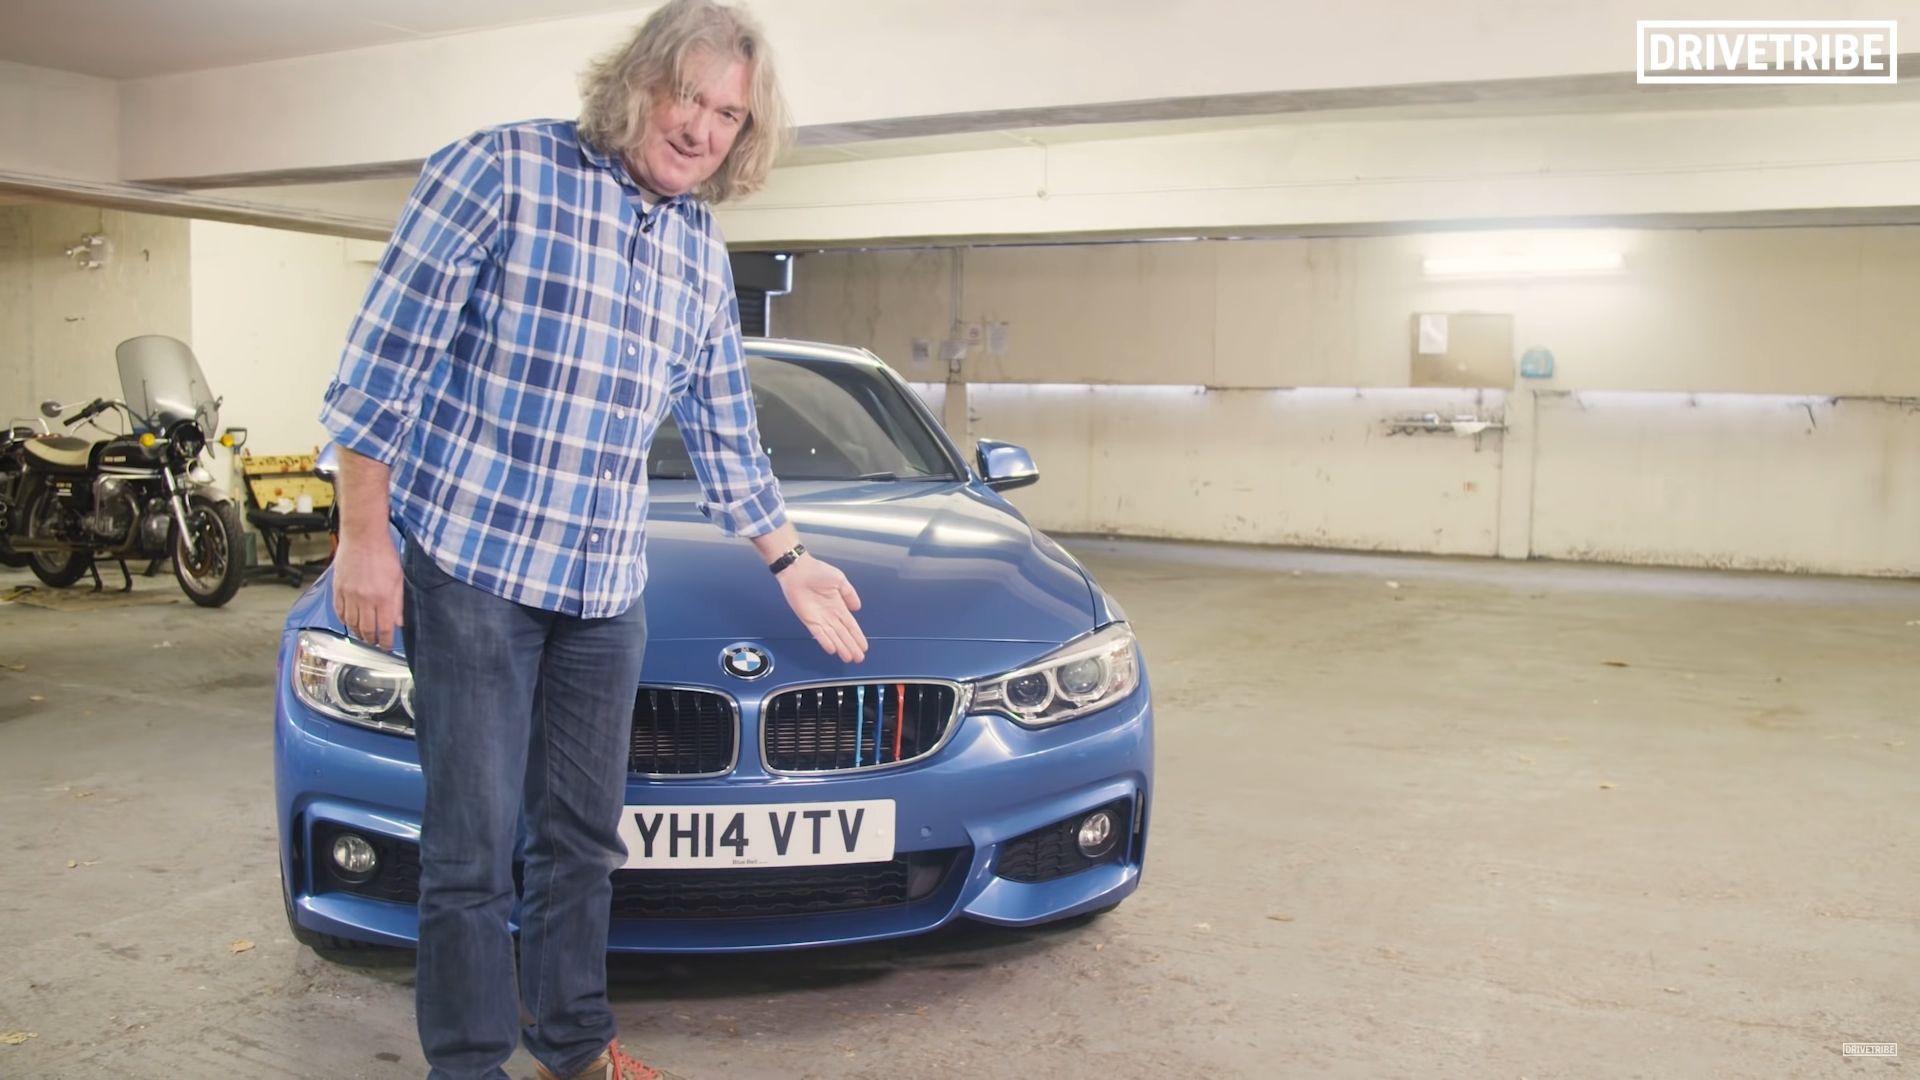 James May Unpimp My Ride In Front Of BMW 240i With M Stickering On Grille